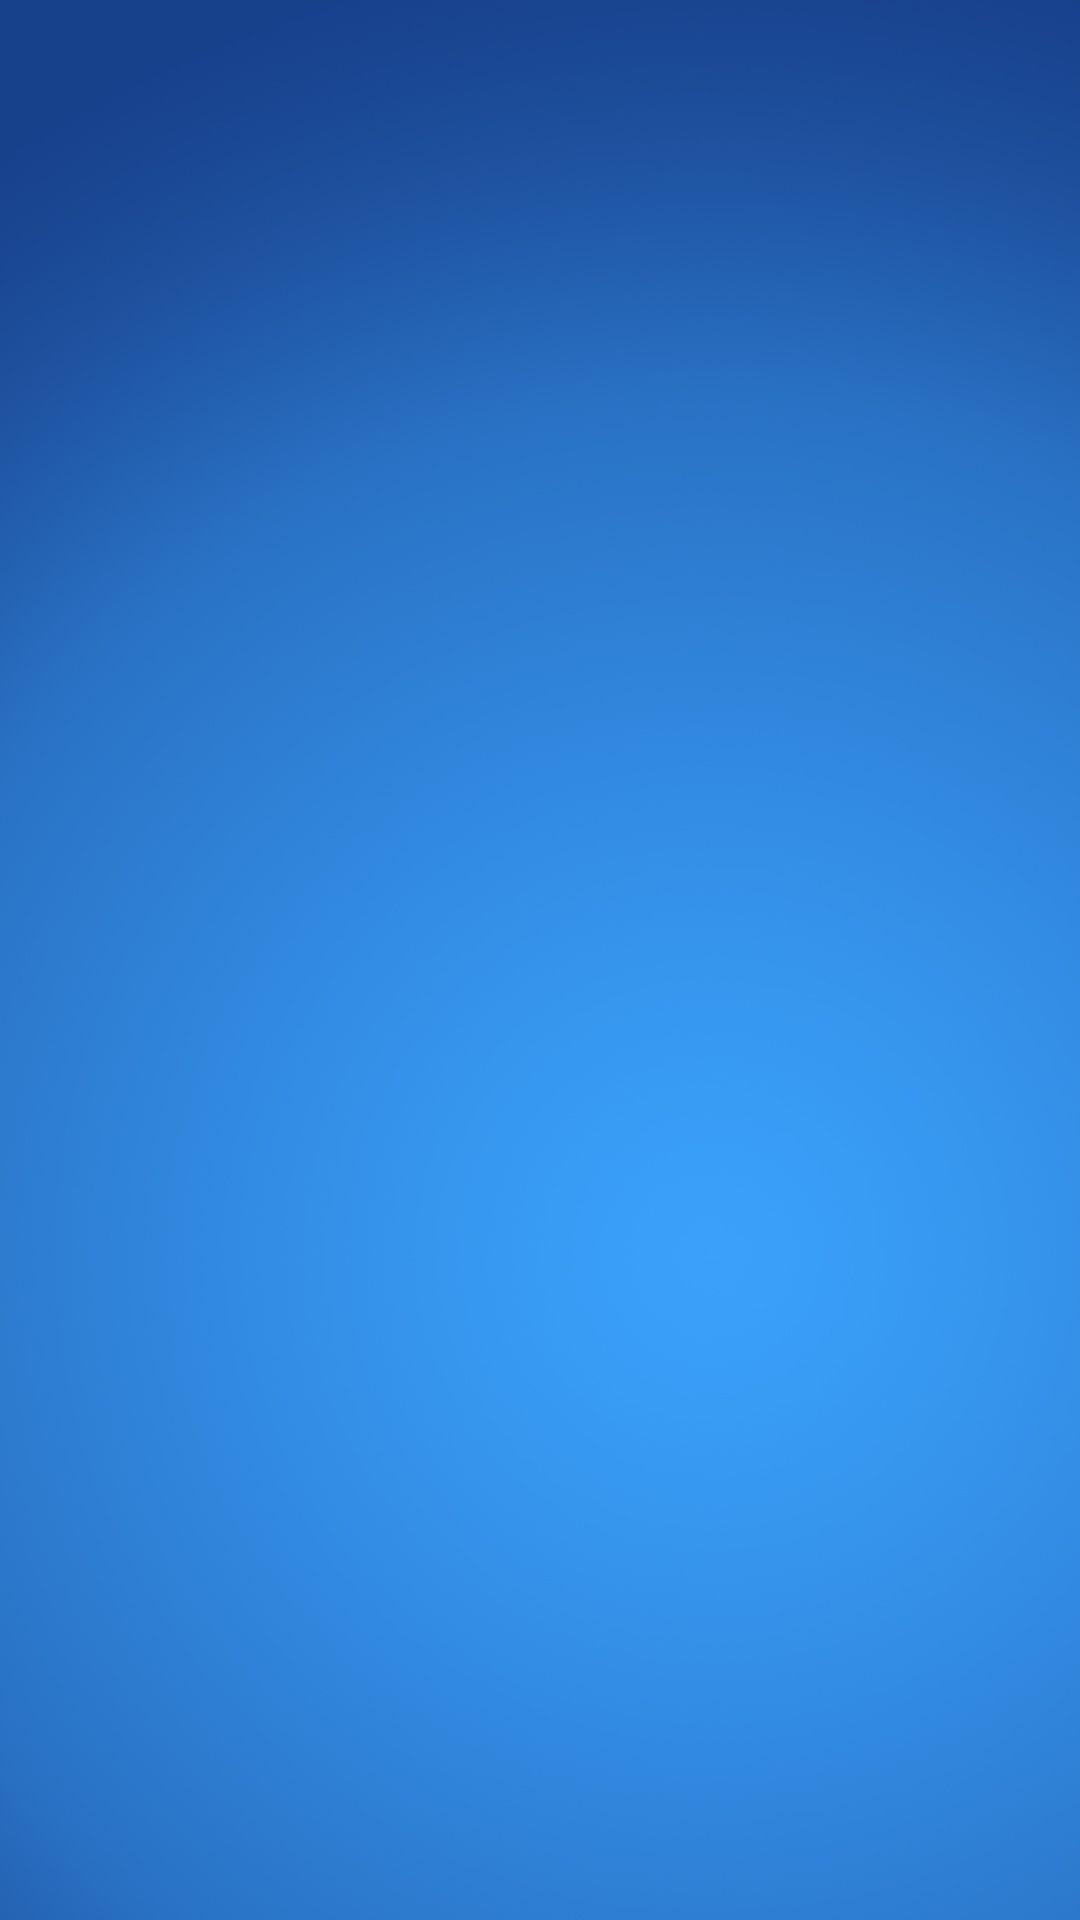 Abstract blue htc one wallpaper, free and easy to download